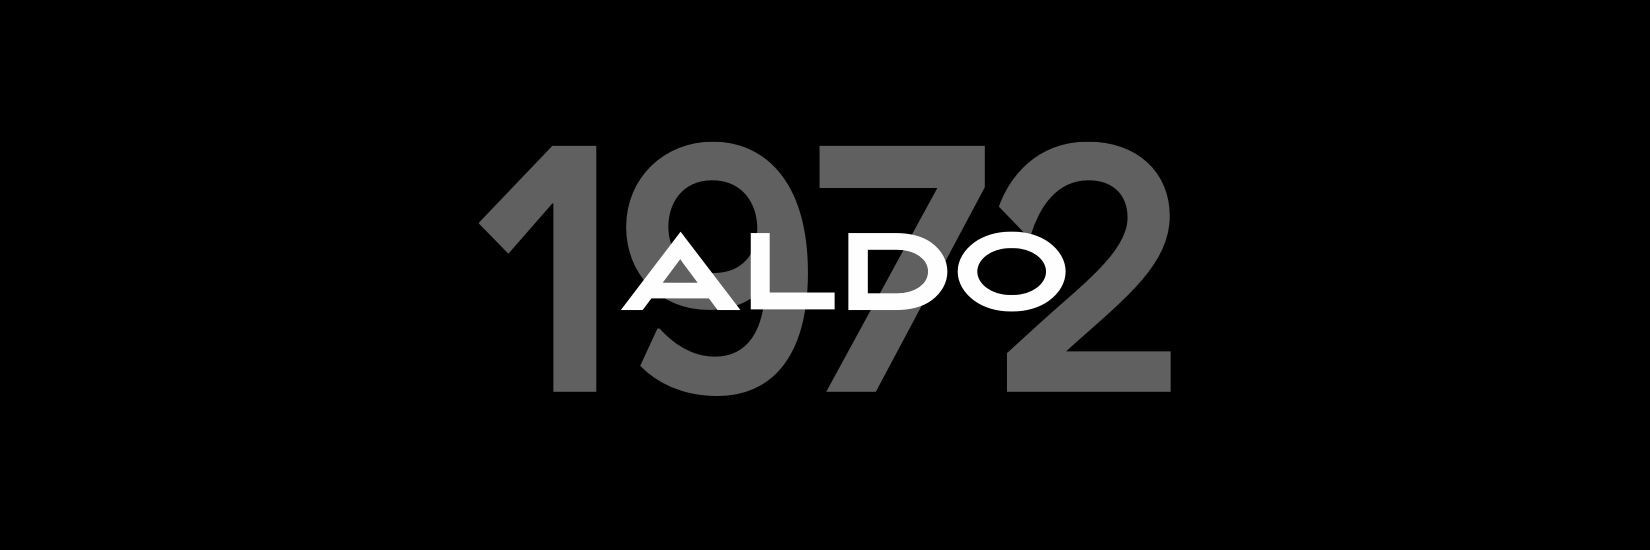 1972, when ALDO was founded, on a black background